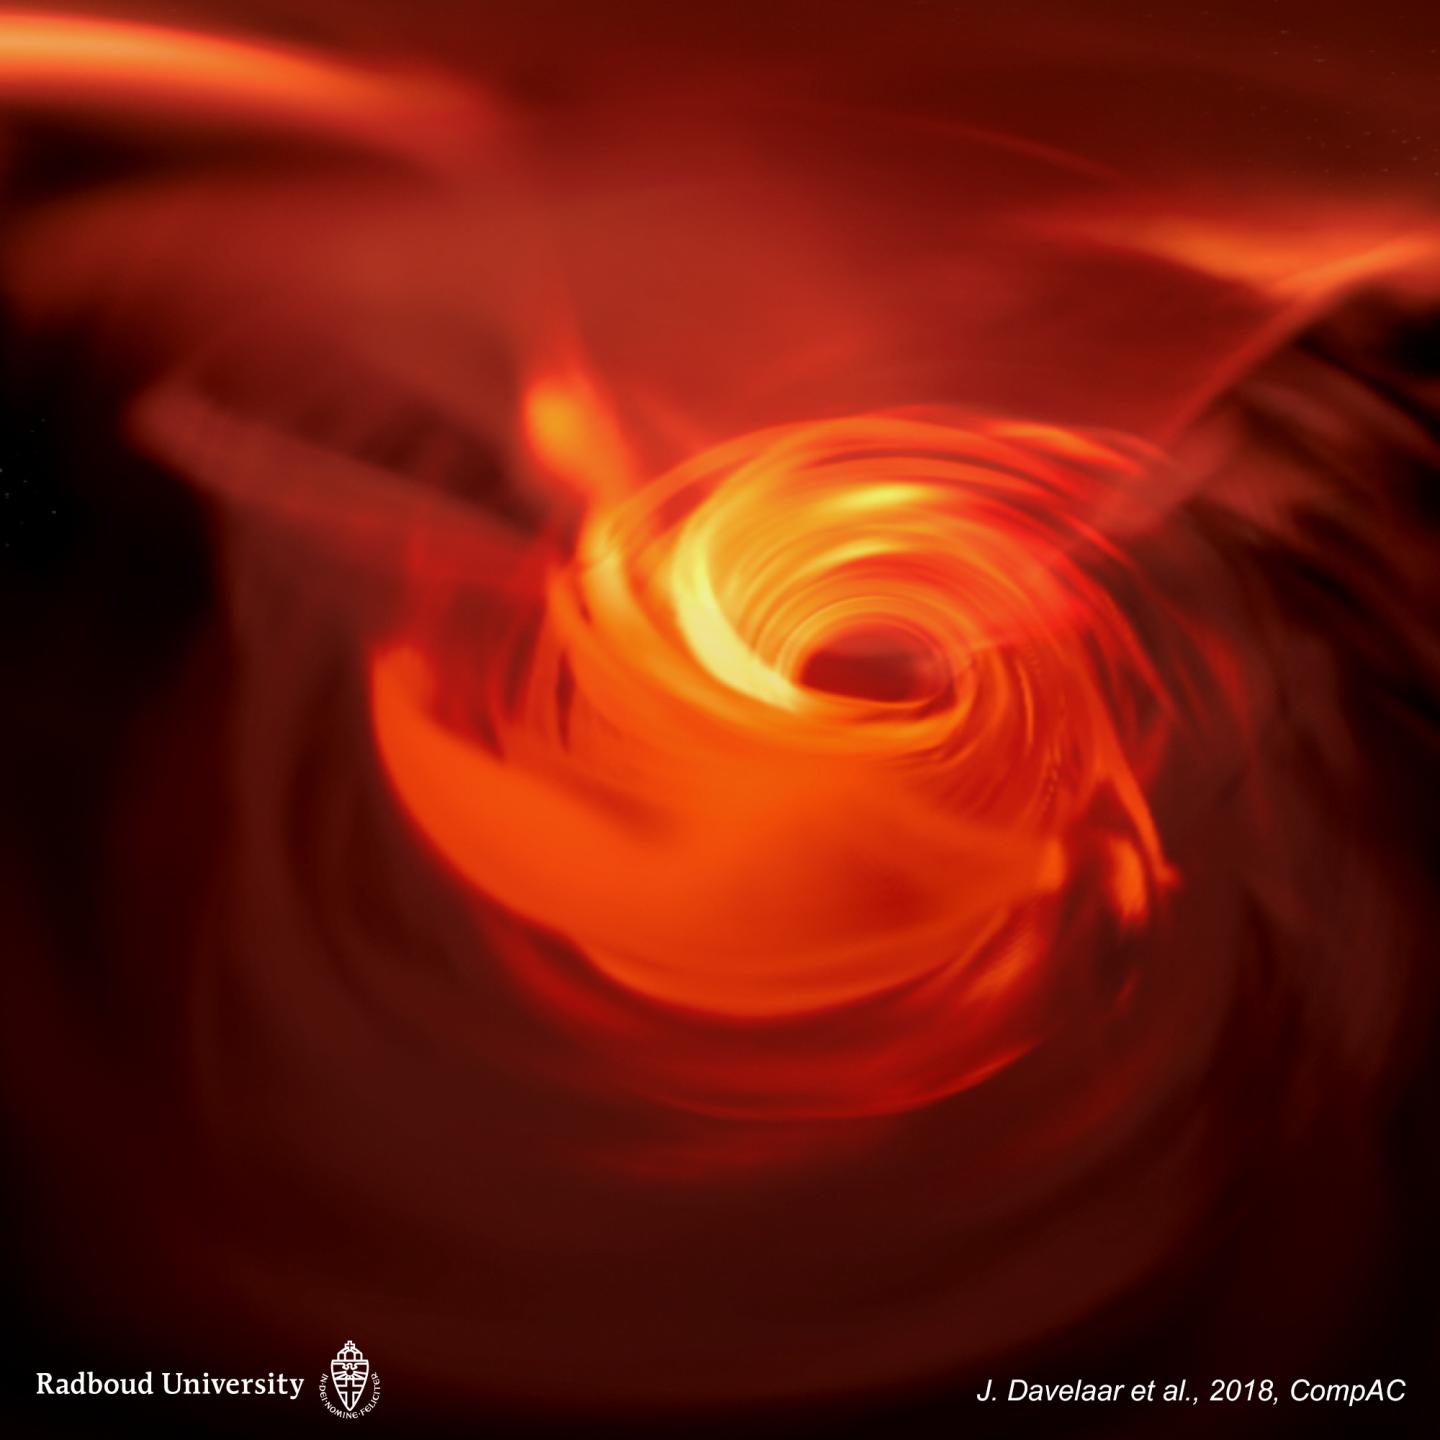 Researchers Have Created a Virtual Reality Simulation of a Supermassive Black Hole